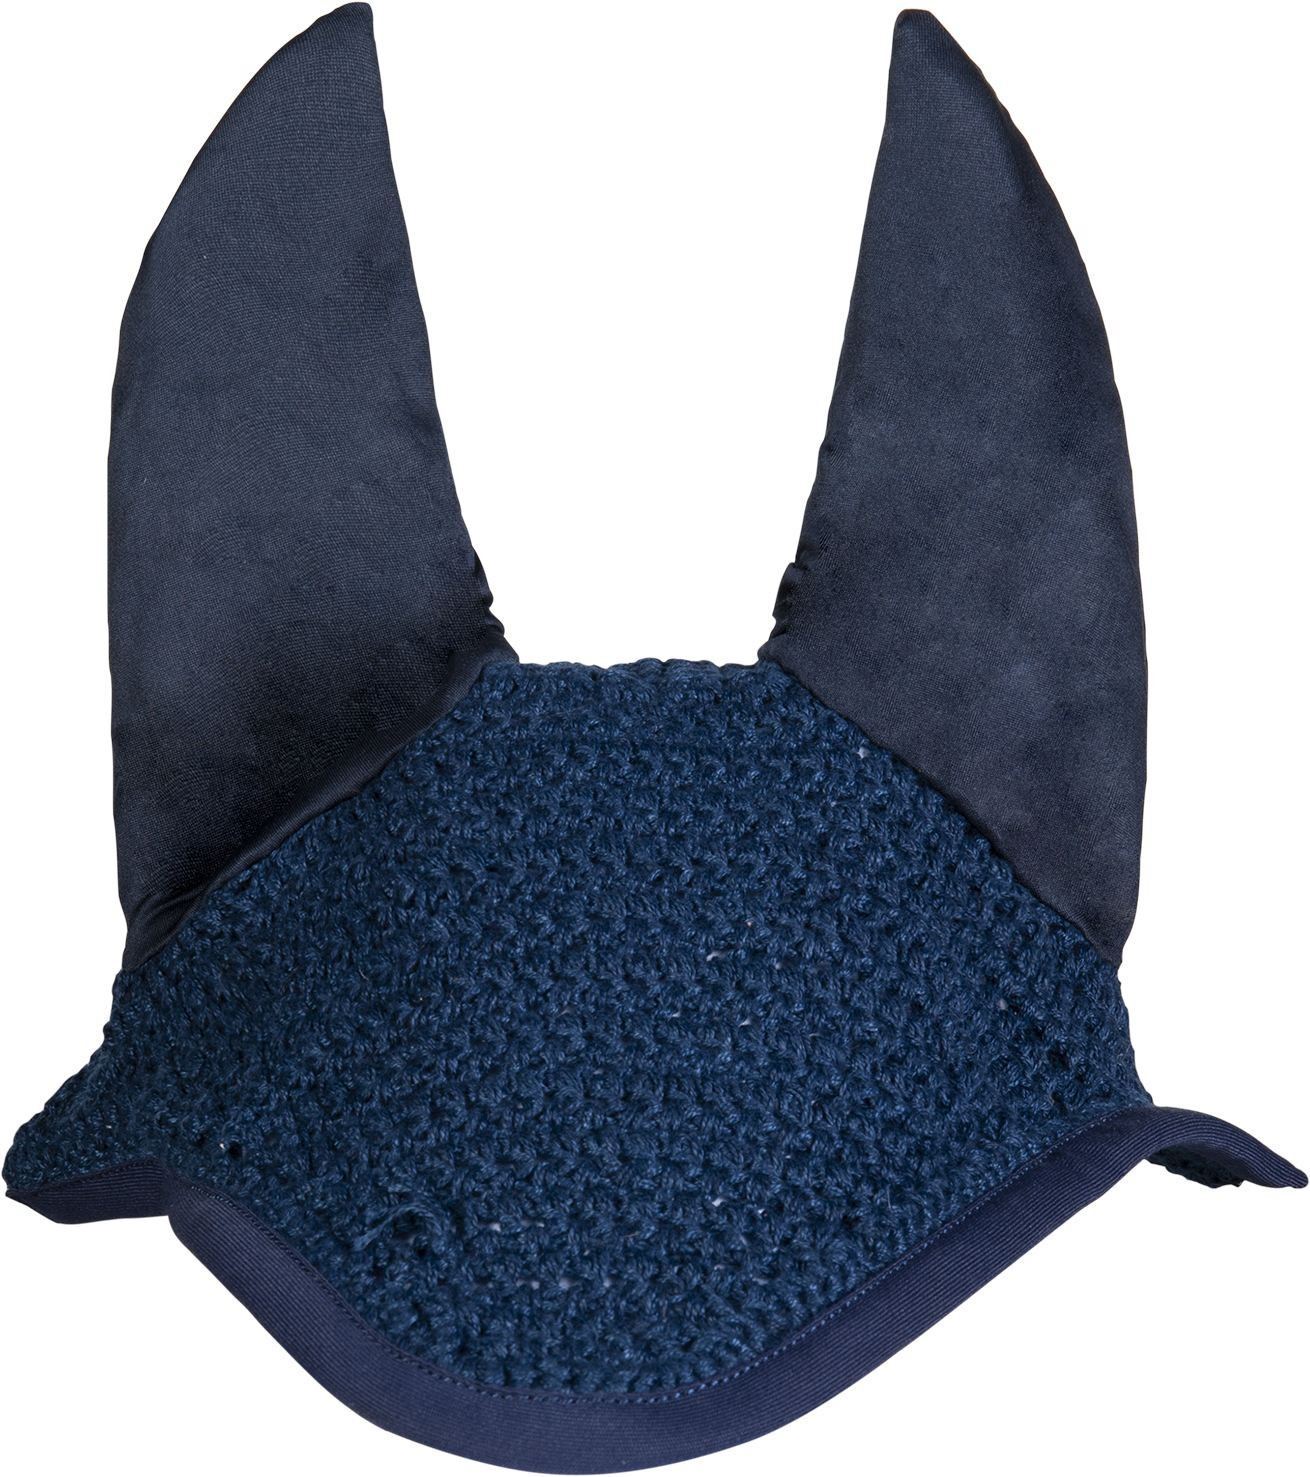 HKM Ear Bonnet Allround - Just Horse Riders